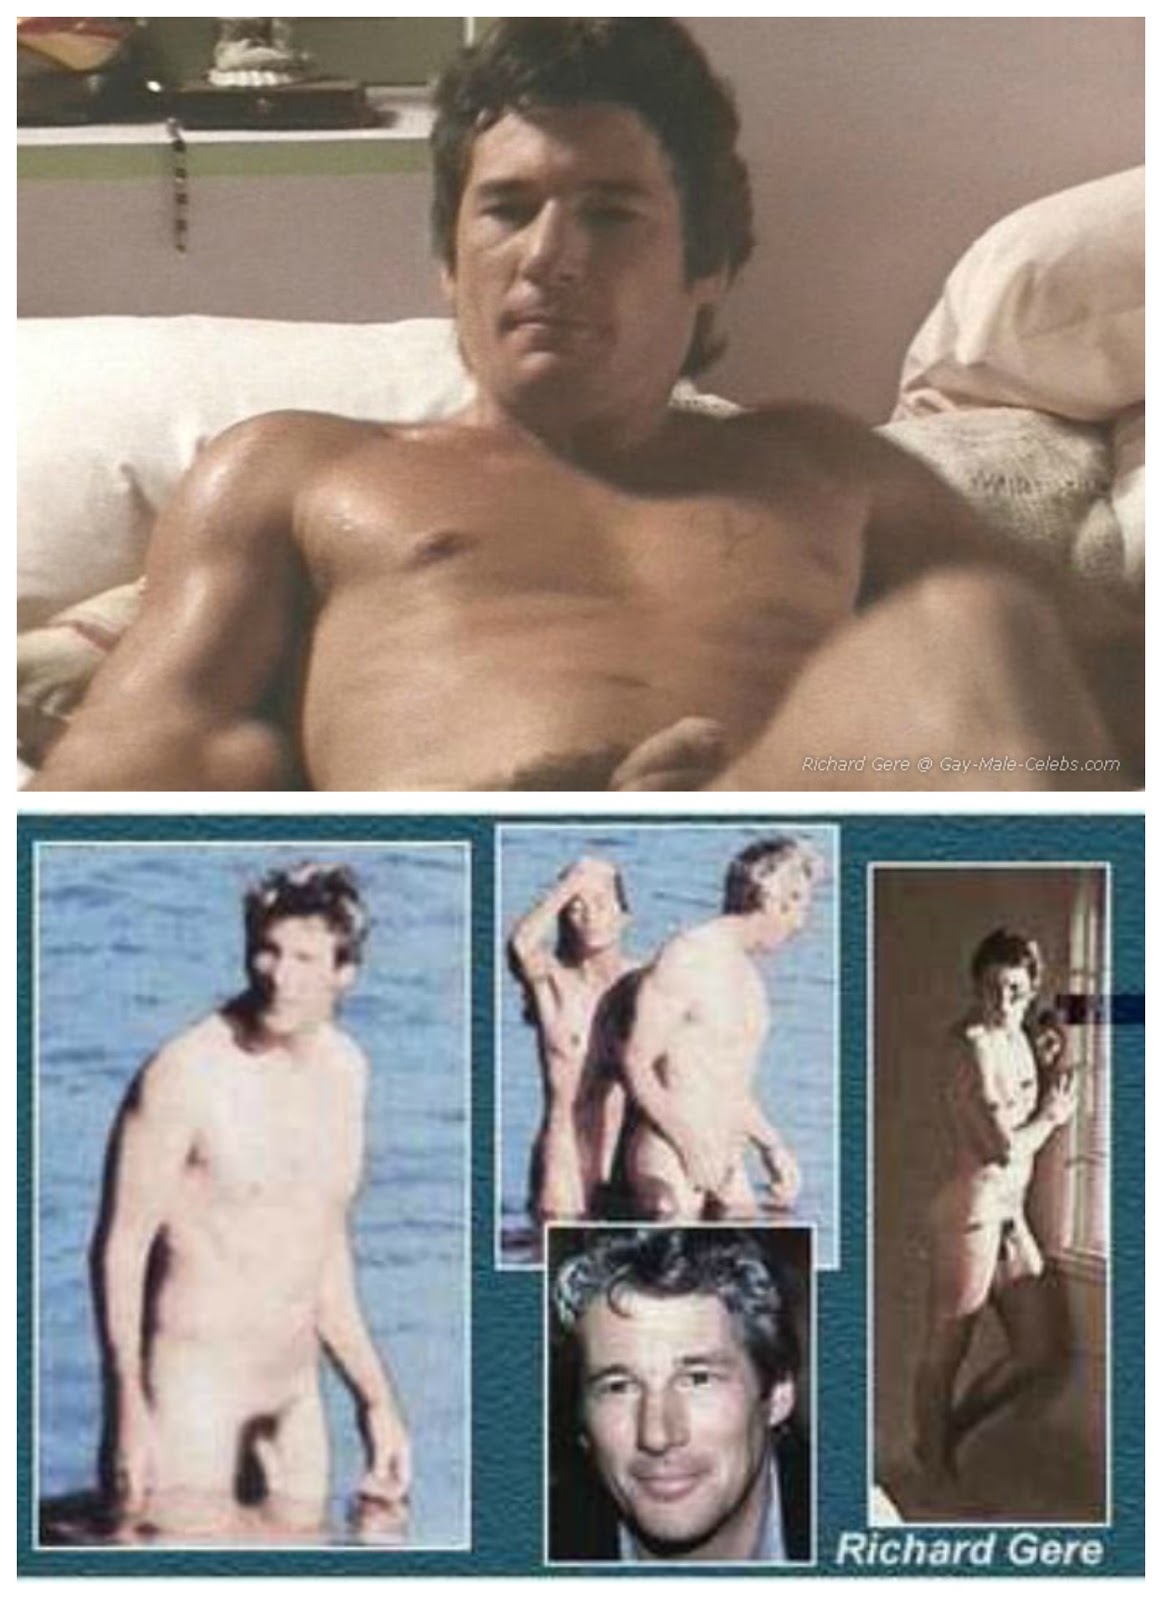 brenda marchese recommends Richard Gere Nude Pics